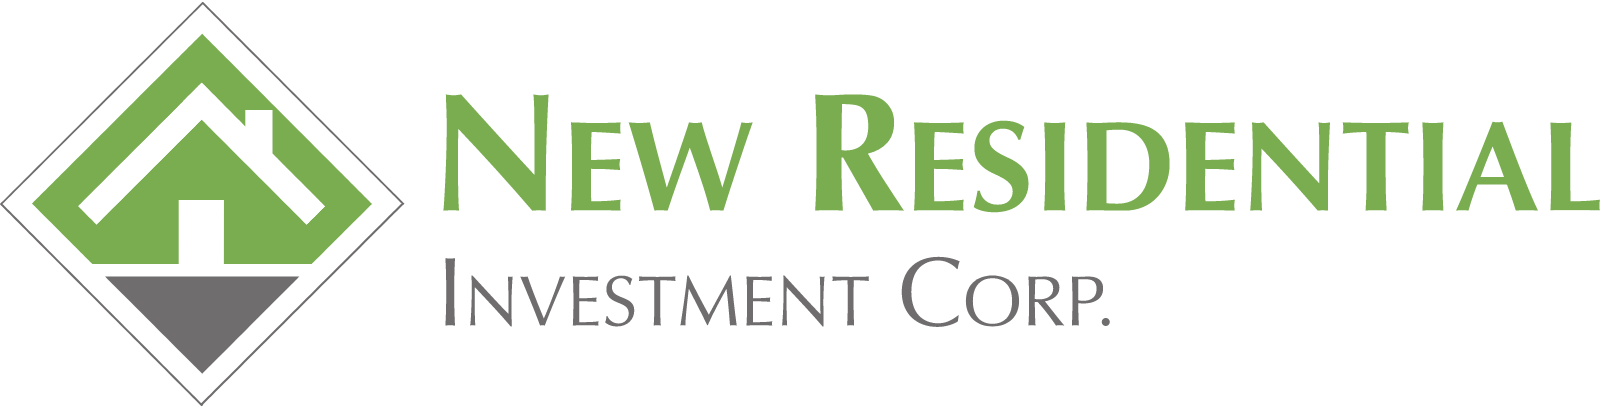 New Residential Investment logo large (transparent PNG)